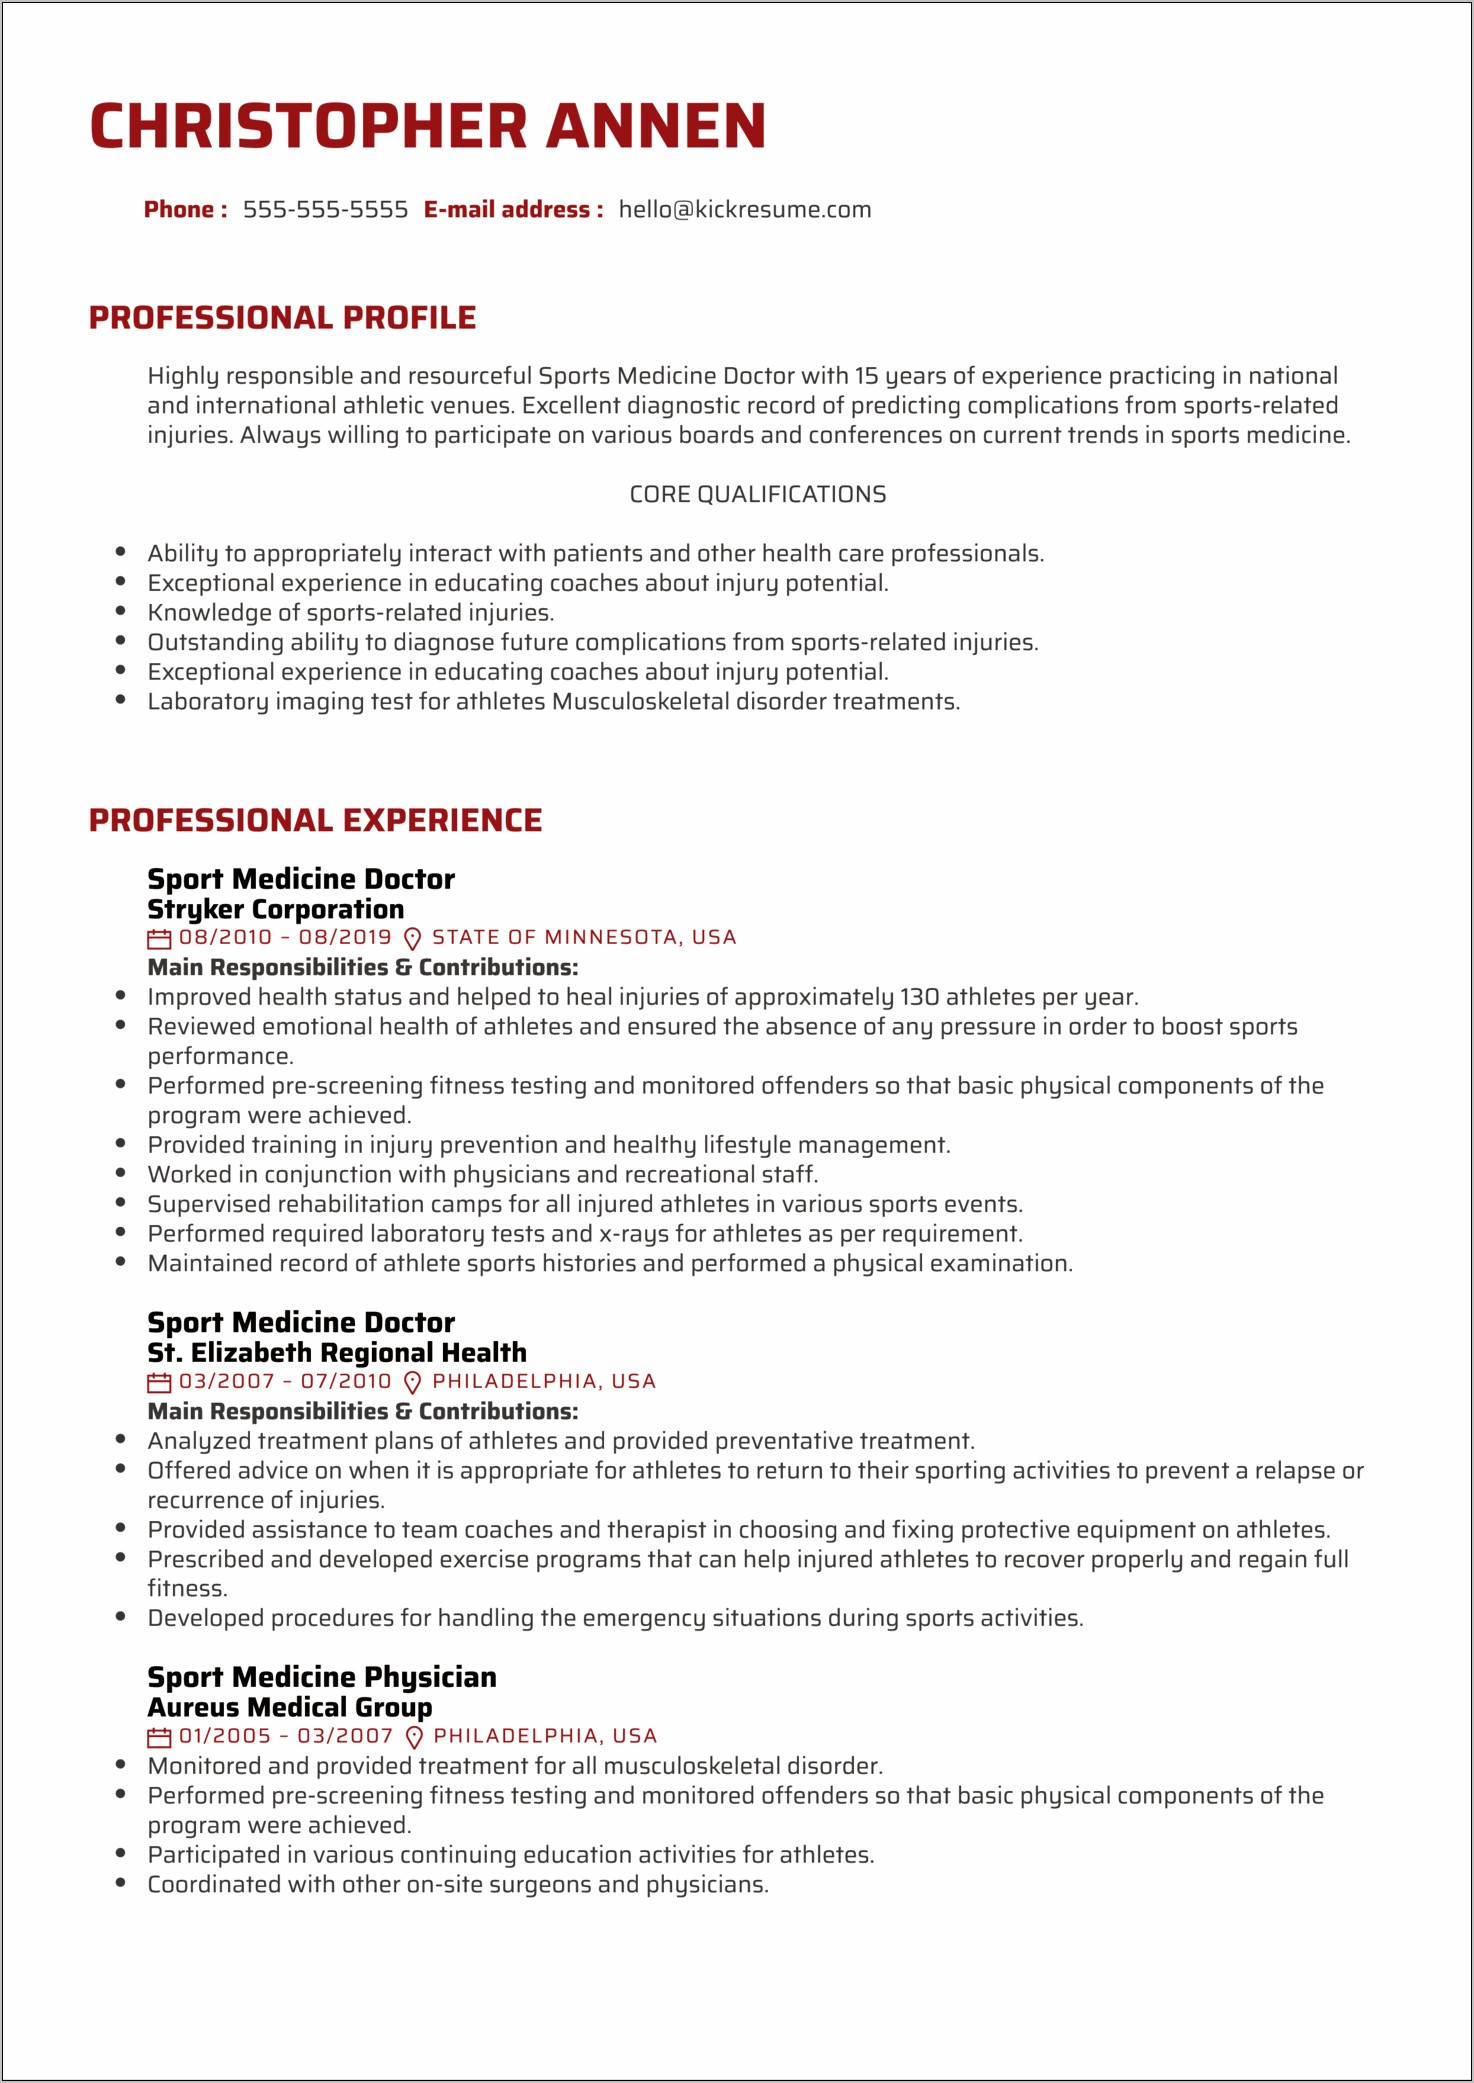 Sample Resumes For Medical Professionals